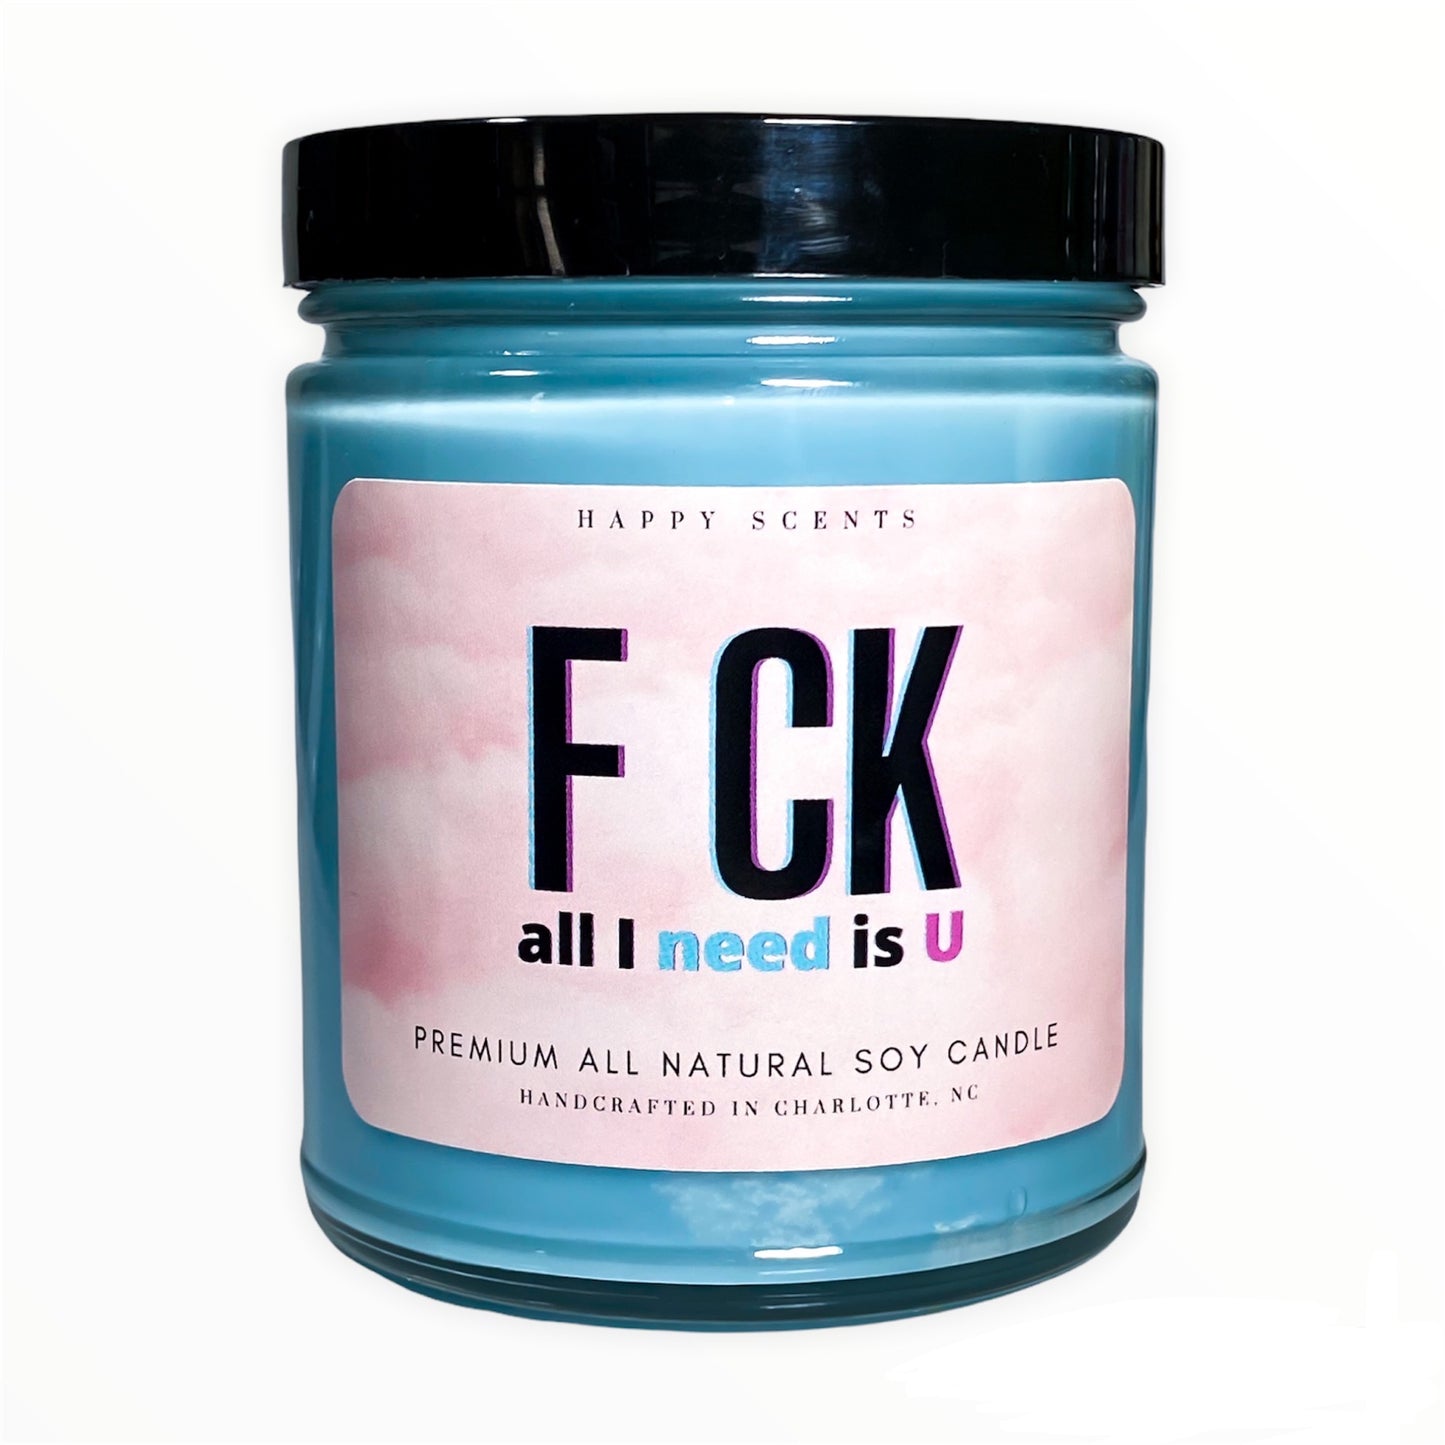 "f ck, all I need is u" Quotable Jar Candle